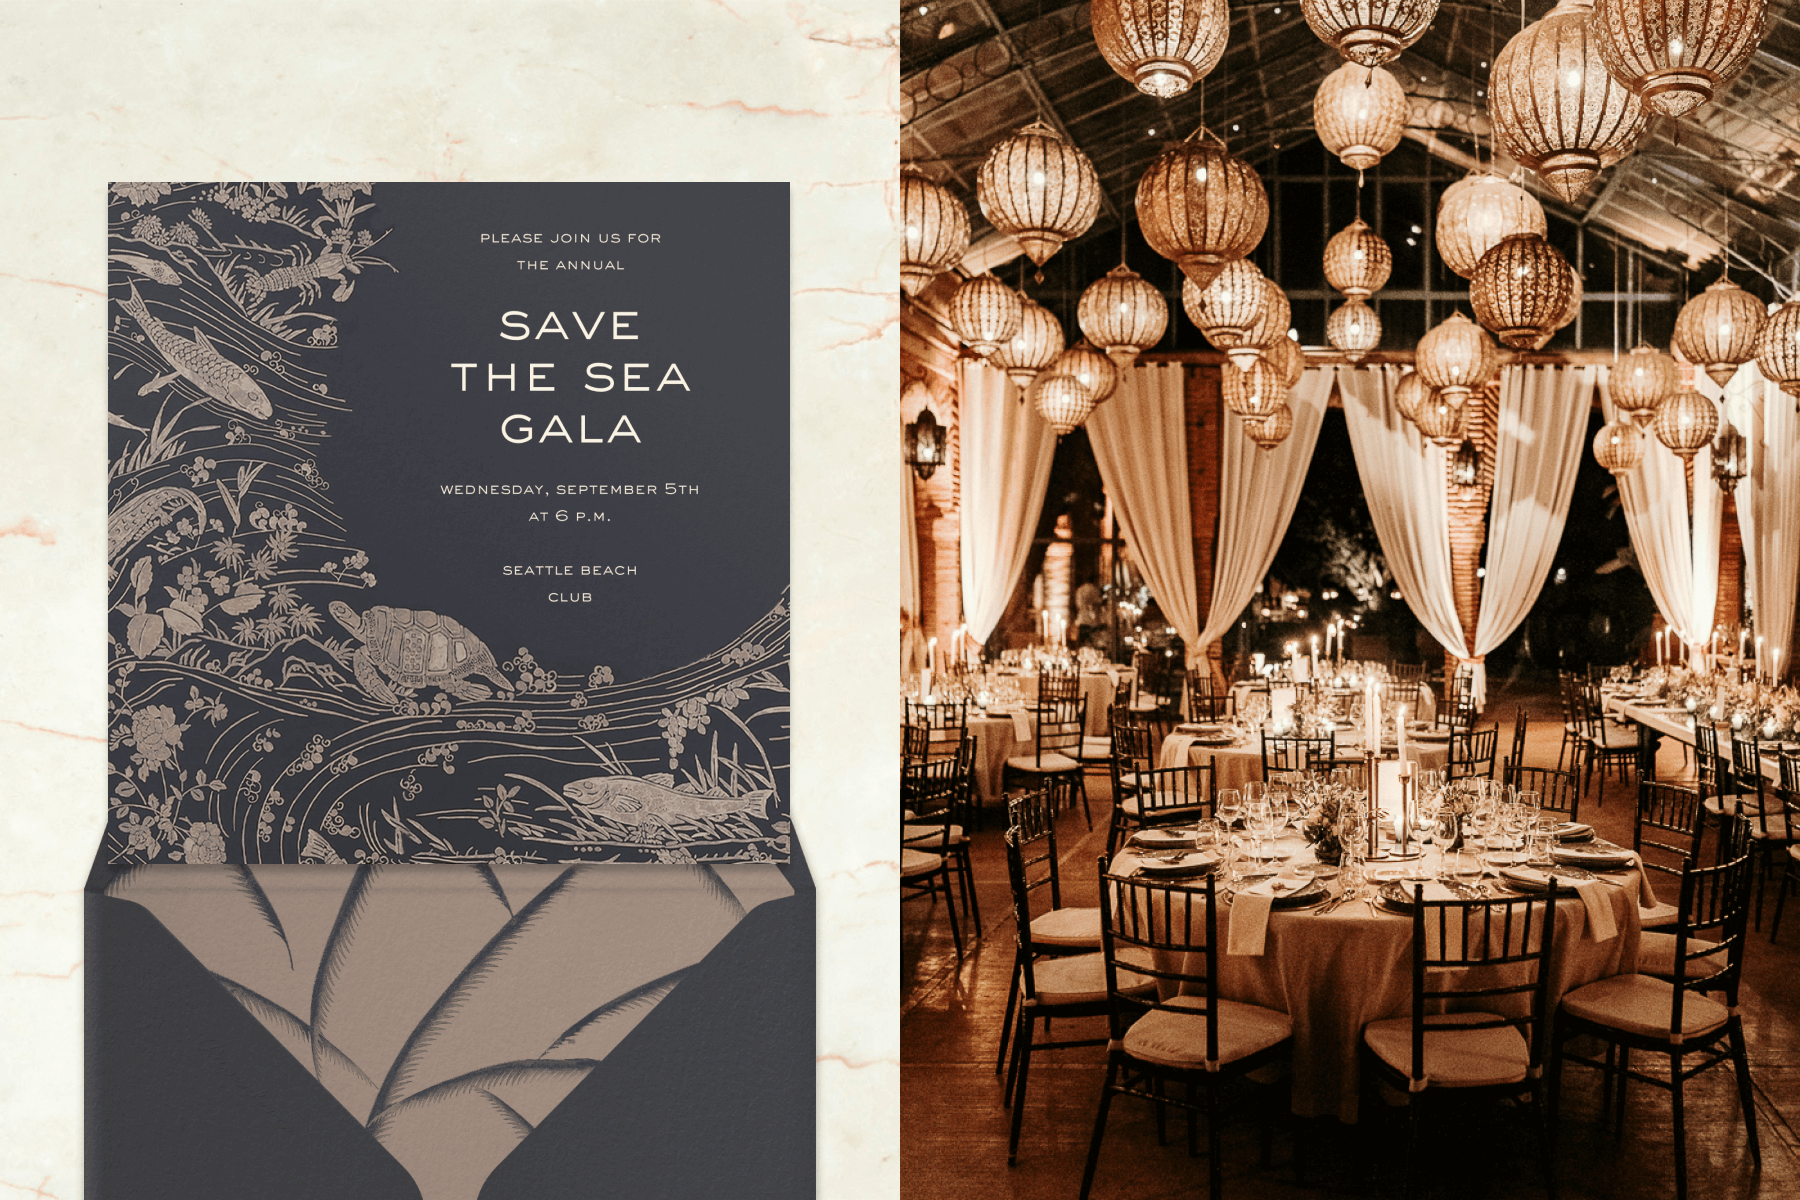 Left: A navy and beige underwater seascape is illustrated onto an invitation that reads “save the sea” gala with a matching illustrated envelope liner. Right: A venue is beautifully decorated with sparkling lanterns and draping curtains. Round tables are decorated with place settings, flowers, and candles.